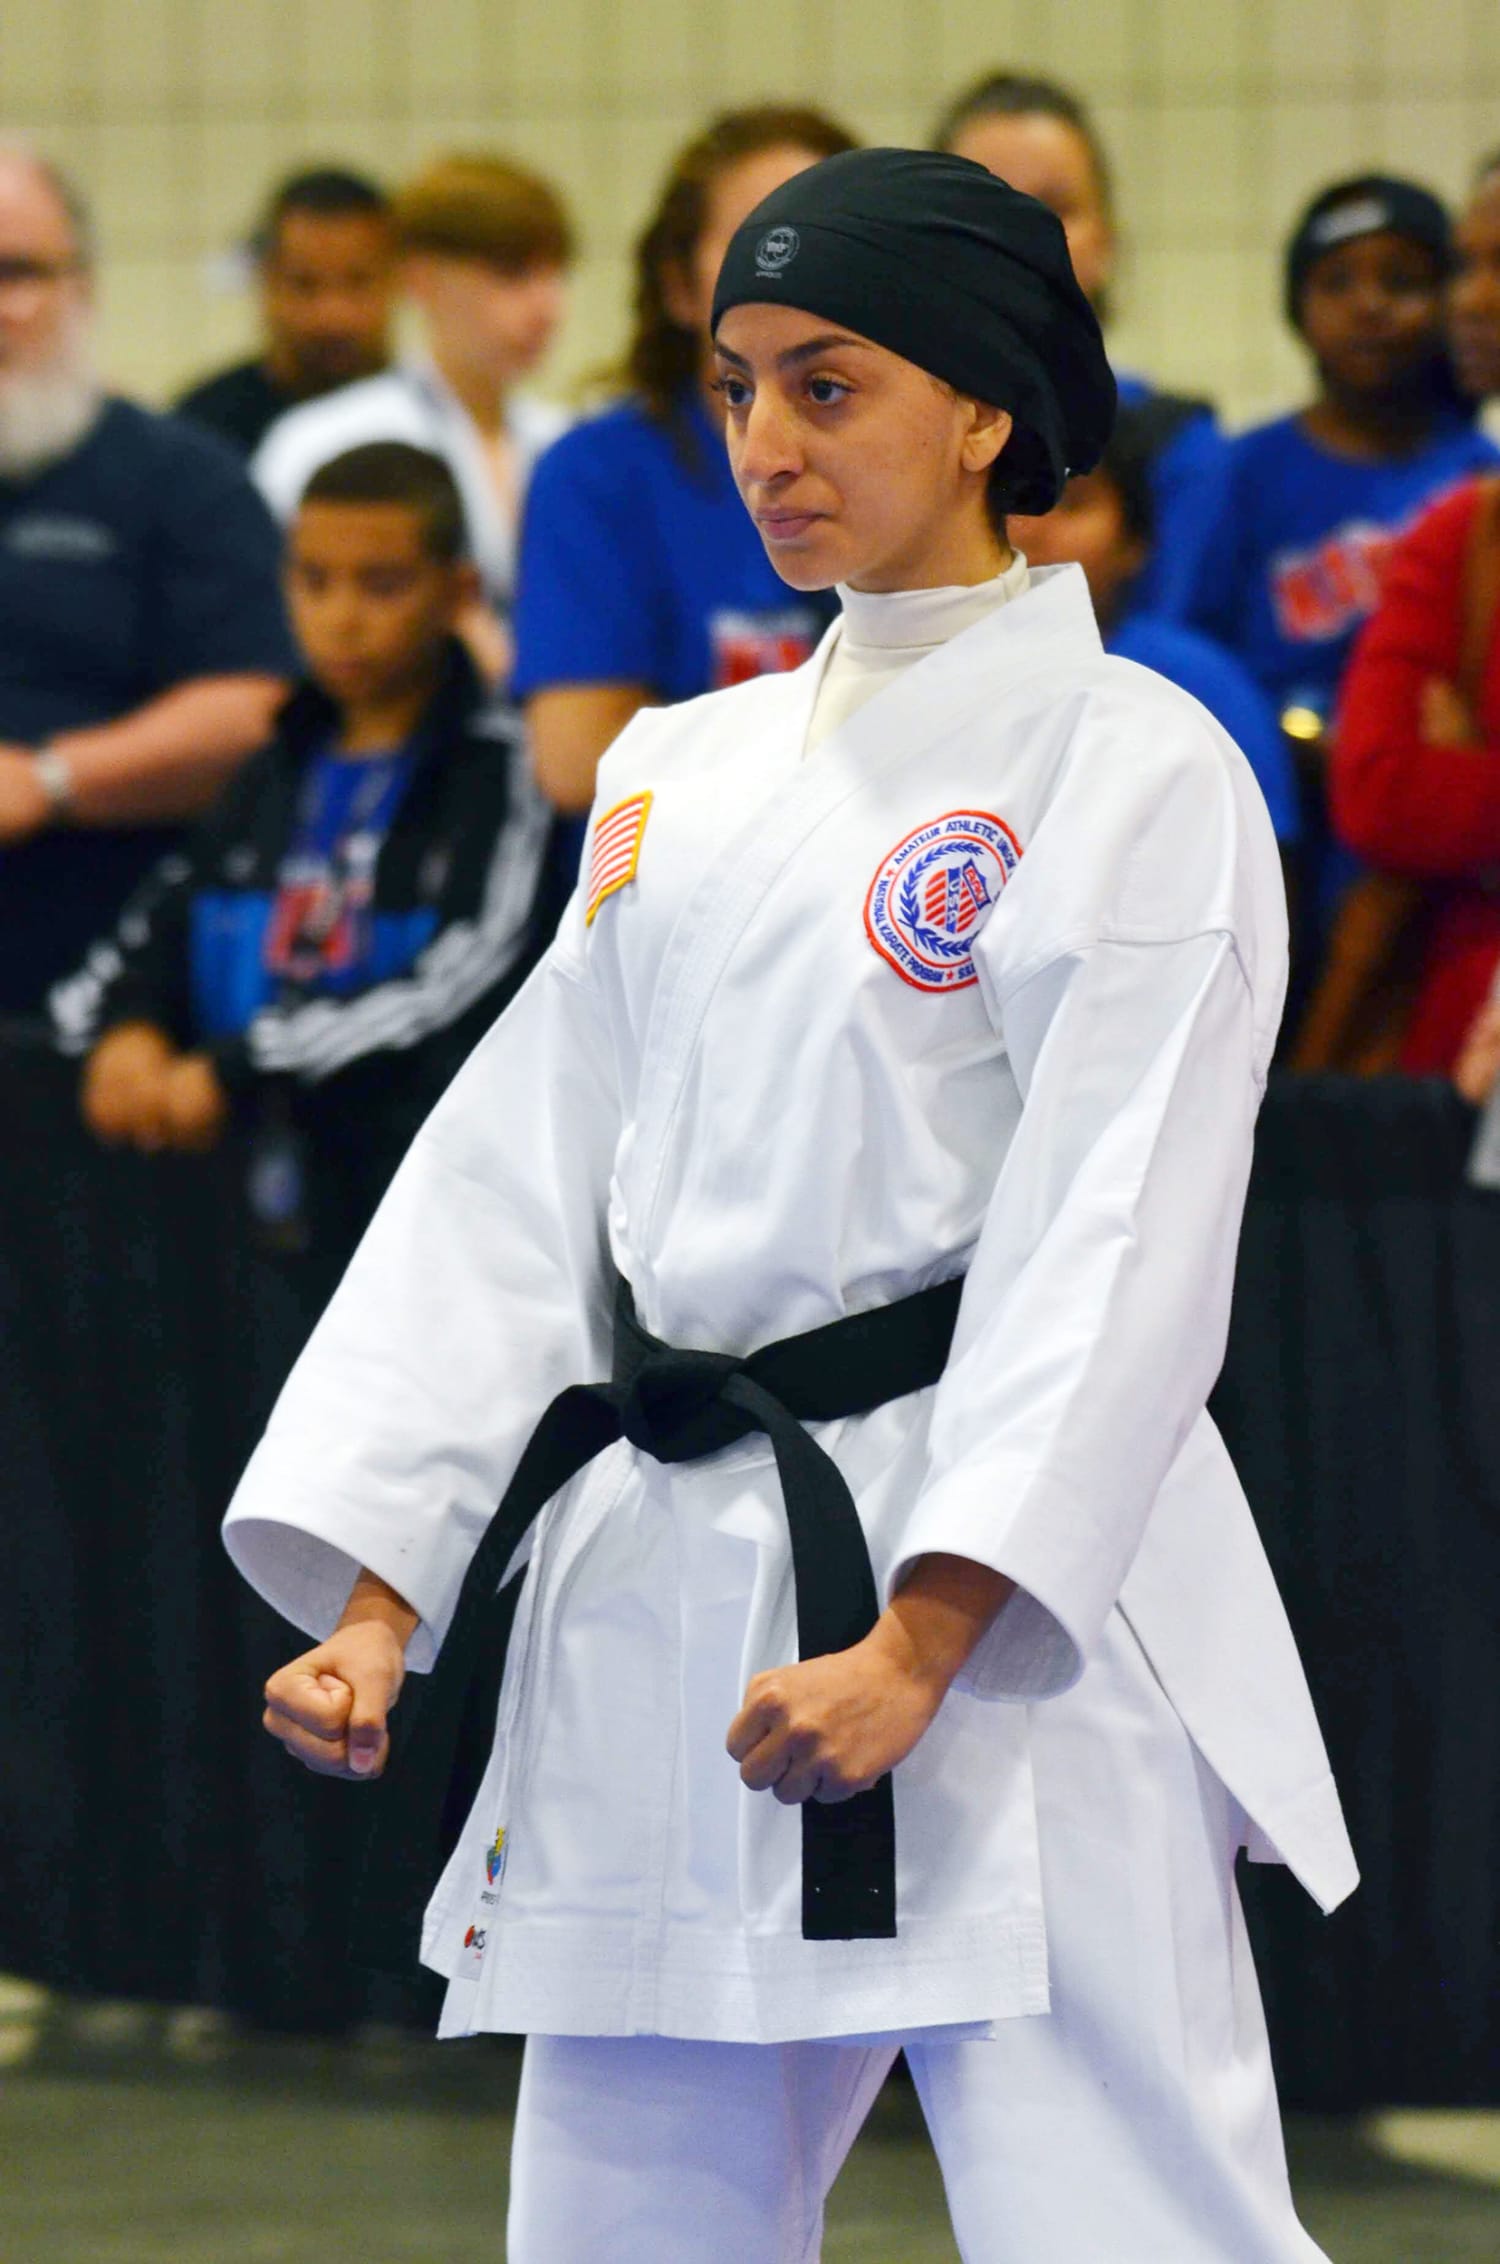 Breaking bias barriers 17-year old karate champion competes in a hijab